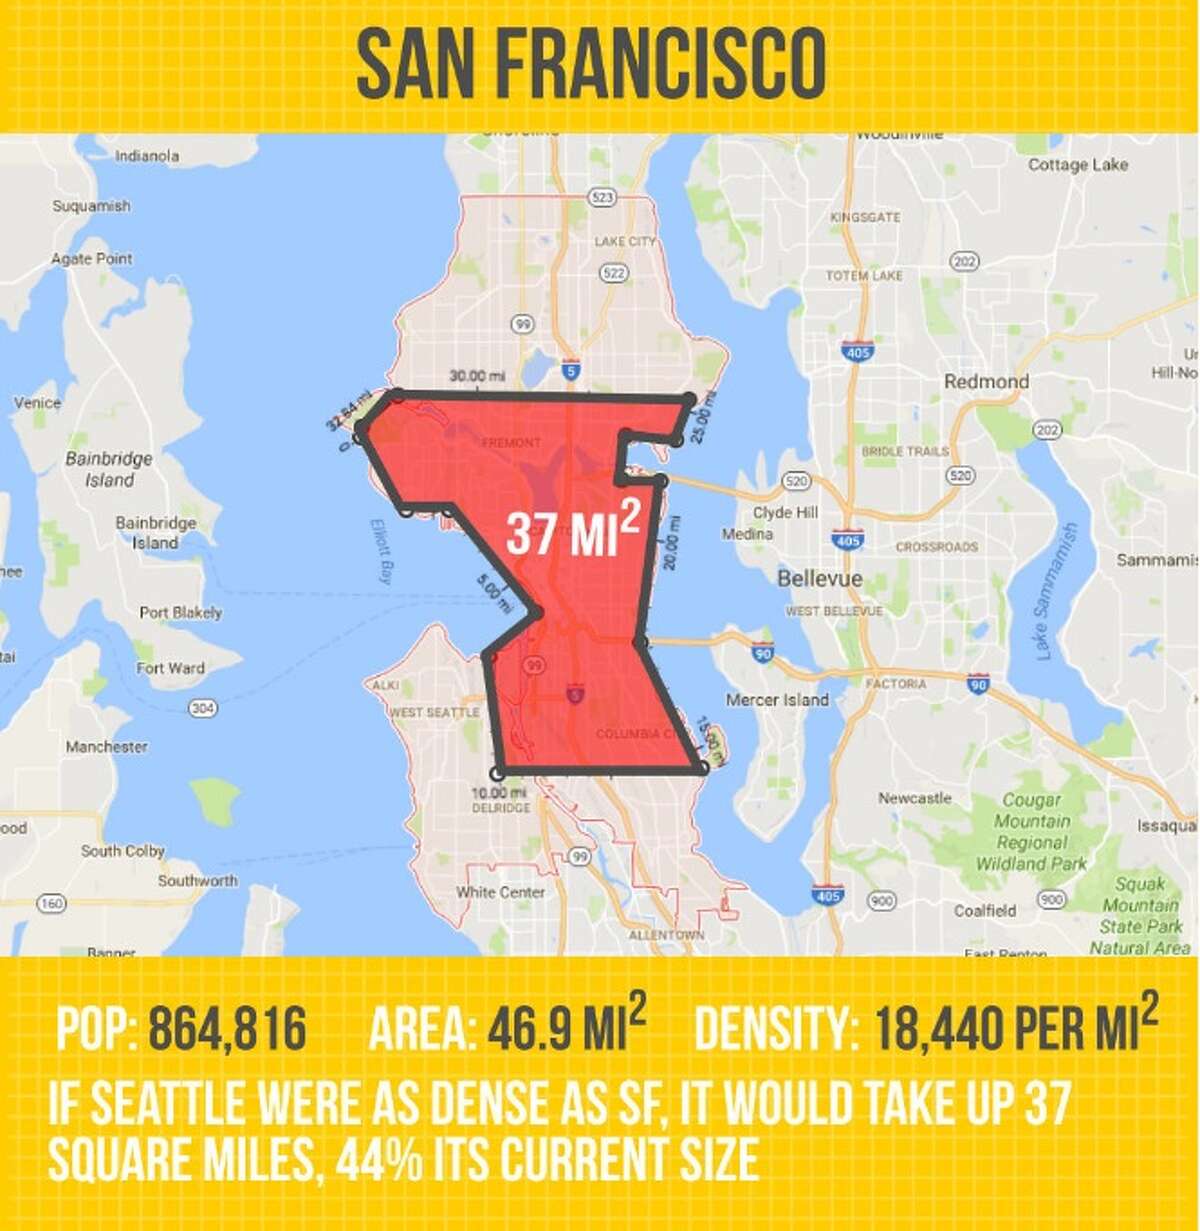 Seattle's population density compared to other cities